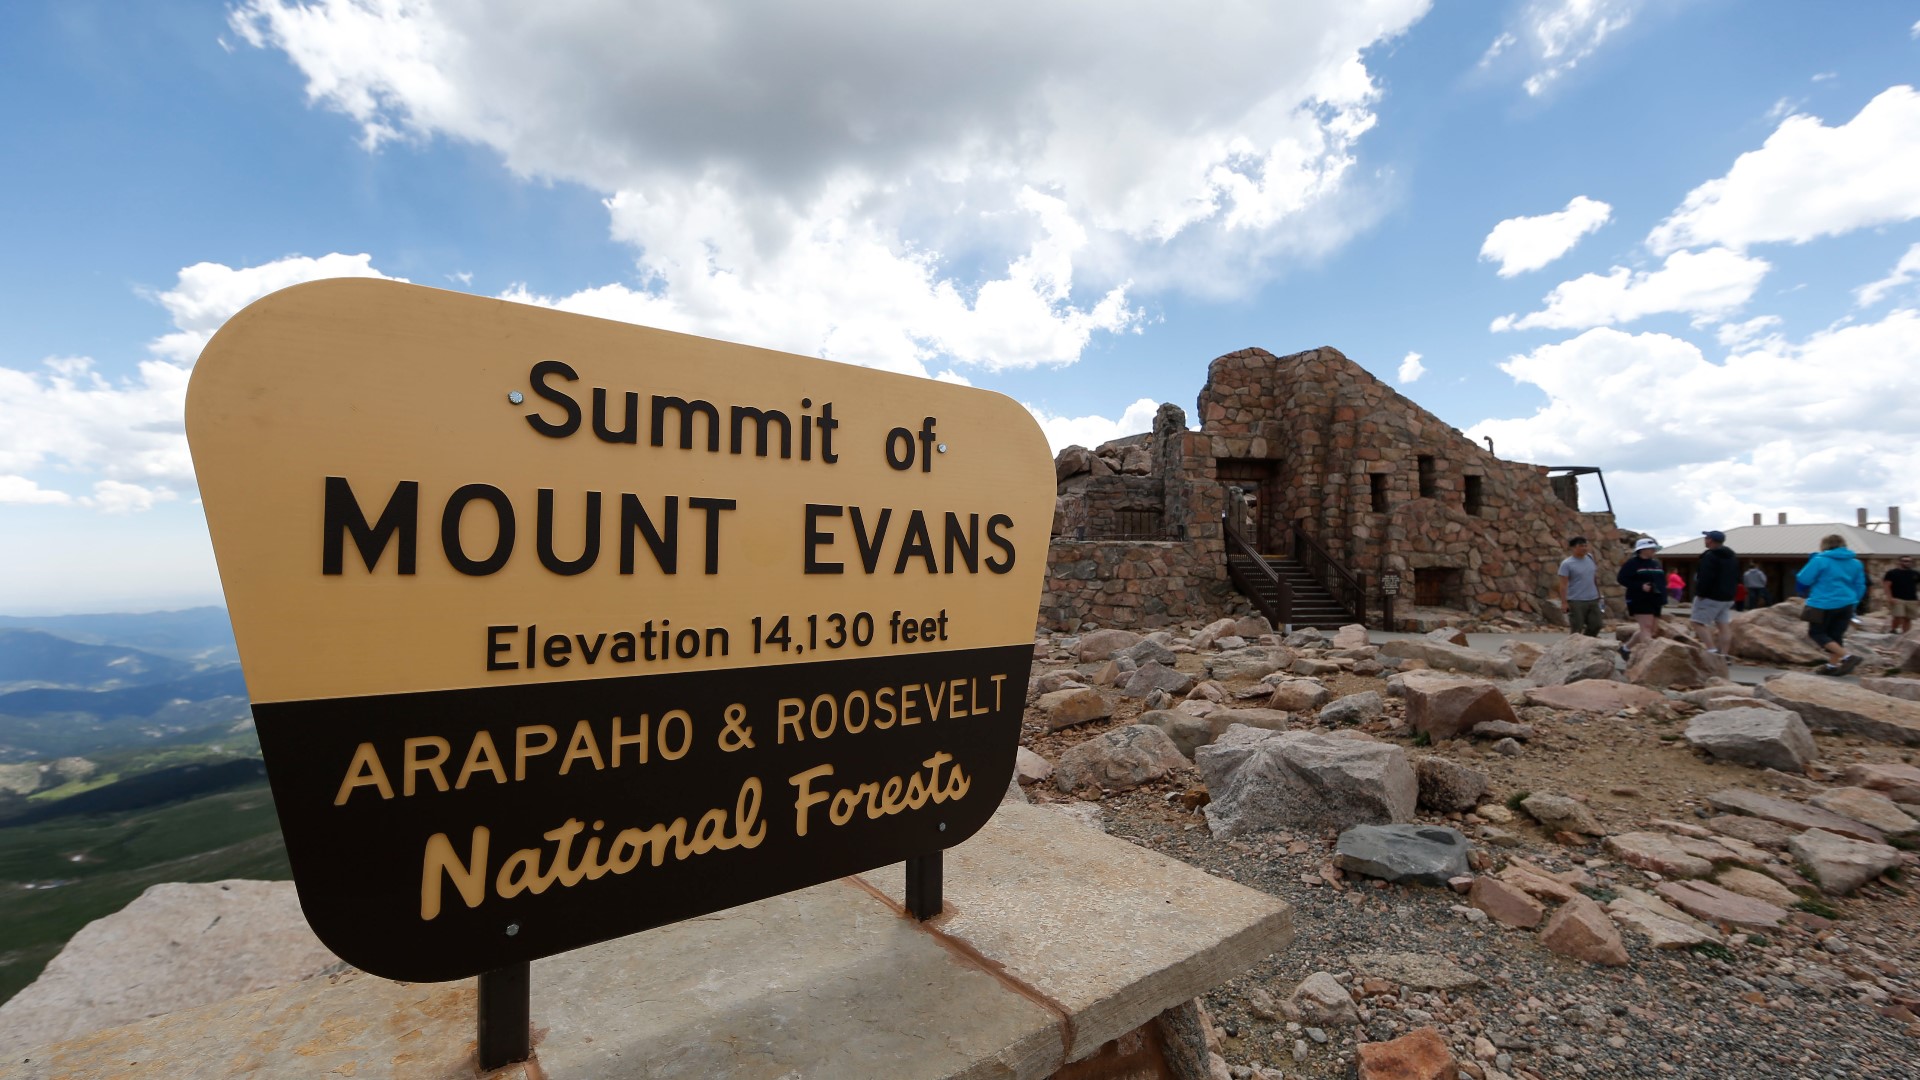 The mountain is currently named for former Colorado Territorial Governor John Evans, who was in office when the Sand Creek Massacre took place in 1864.